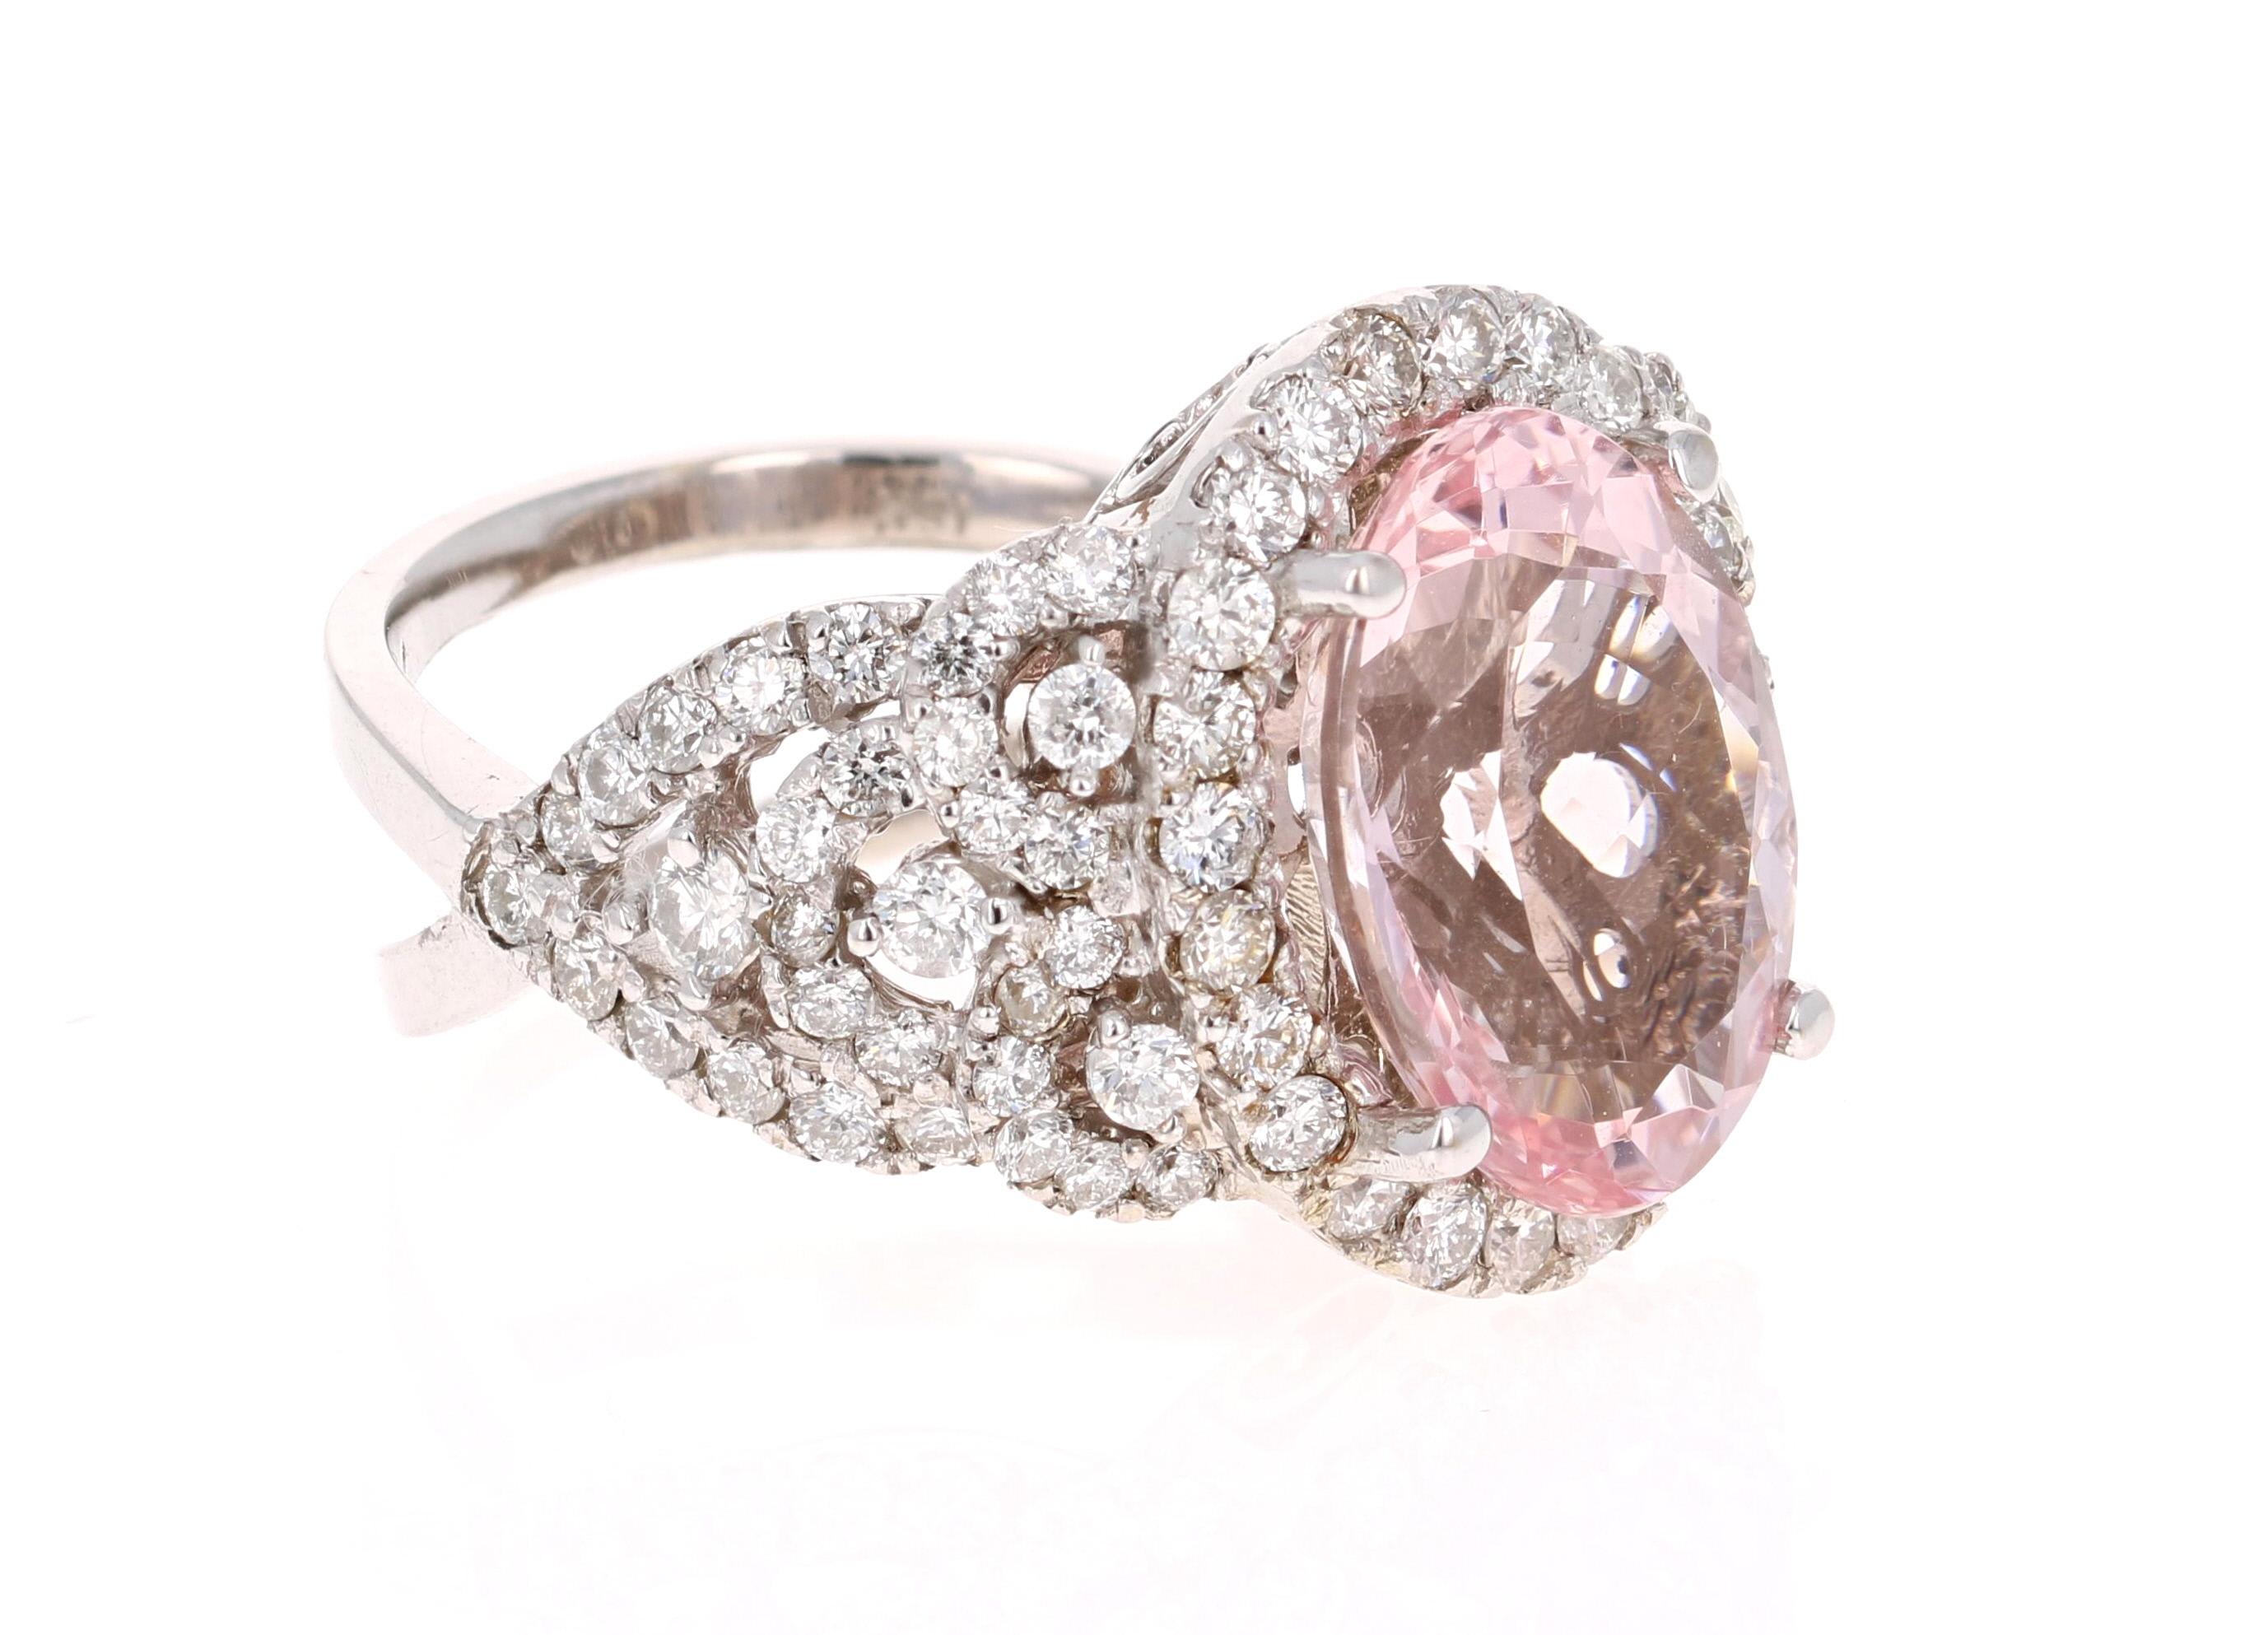 
This Morganite ring has a gorgeous 5.50 Carat Oval Cut Pink Morganite and is surrounded by 88 Round Cut Diamonds that weigh 1.75 Carats. The diamonds have a clarity and color of SI-F. The total carat weight of the ring is 7.25 Carats. 

It is